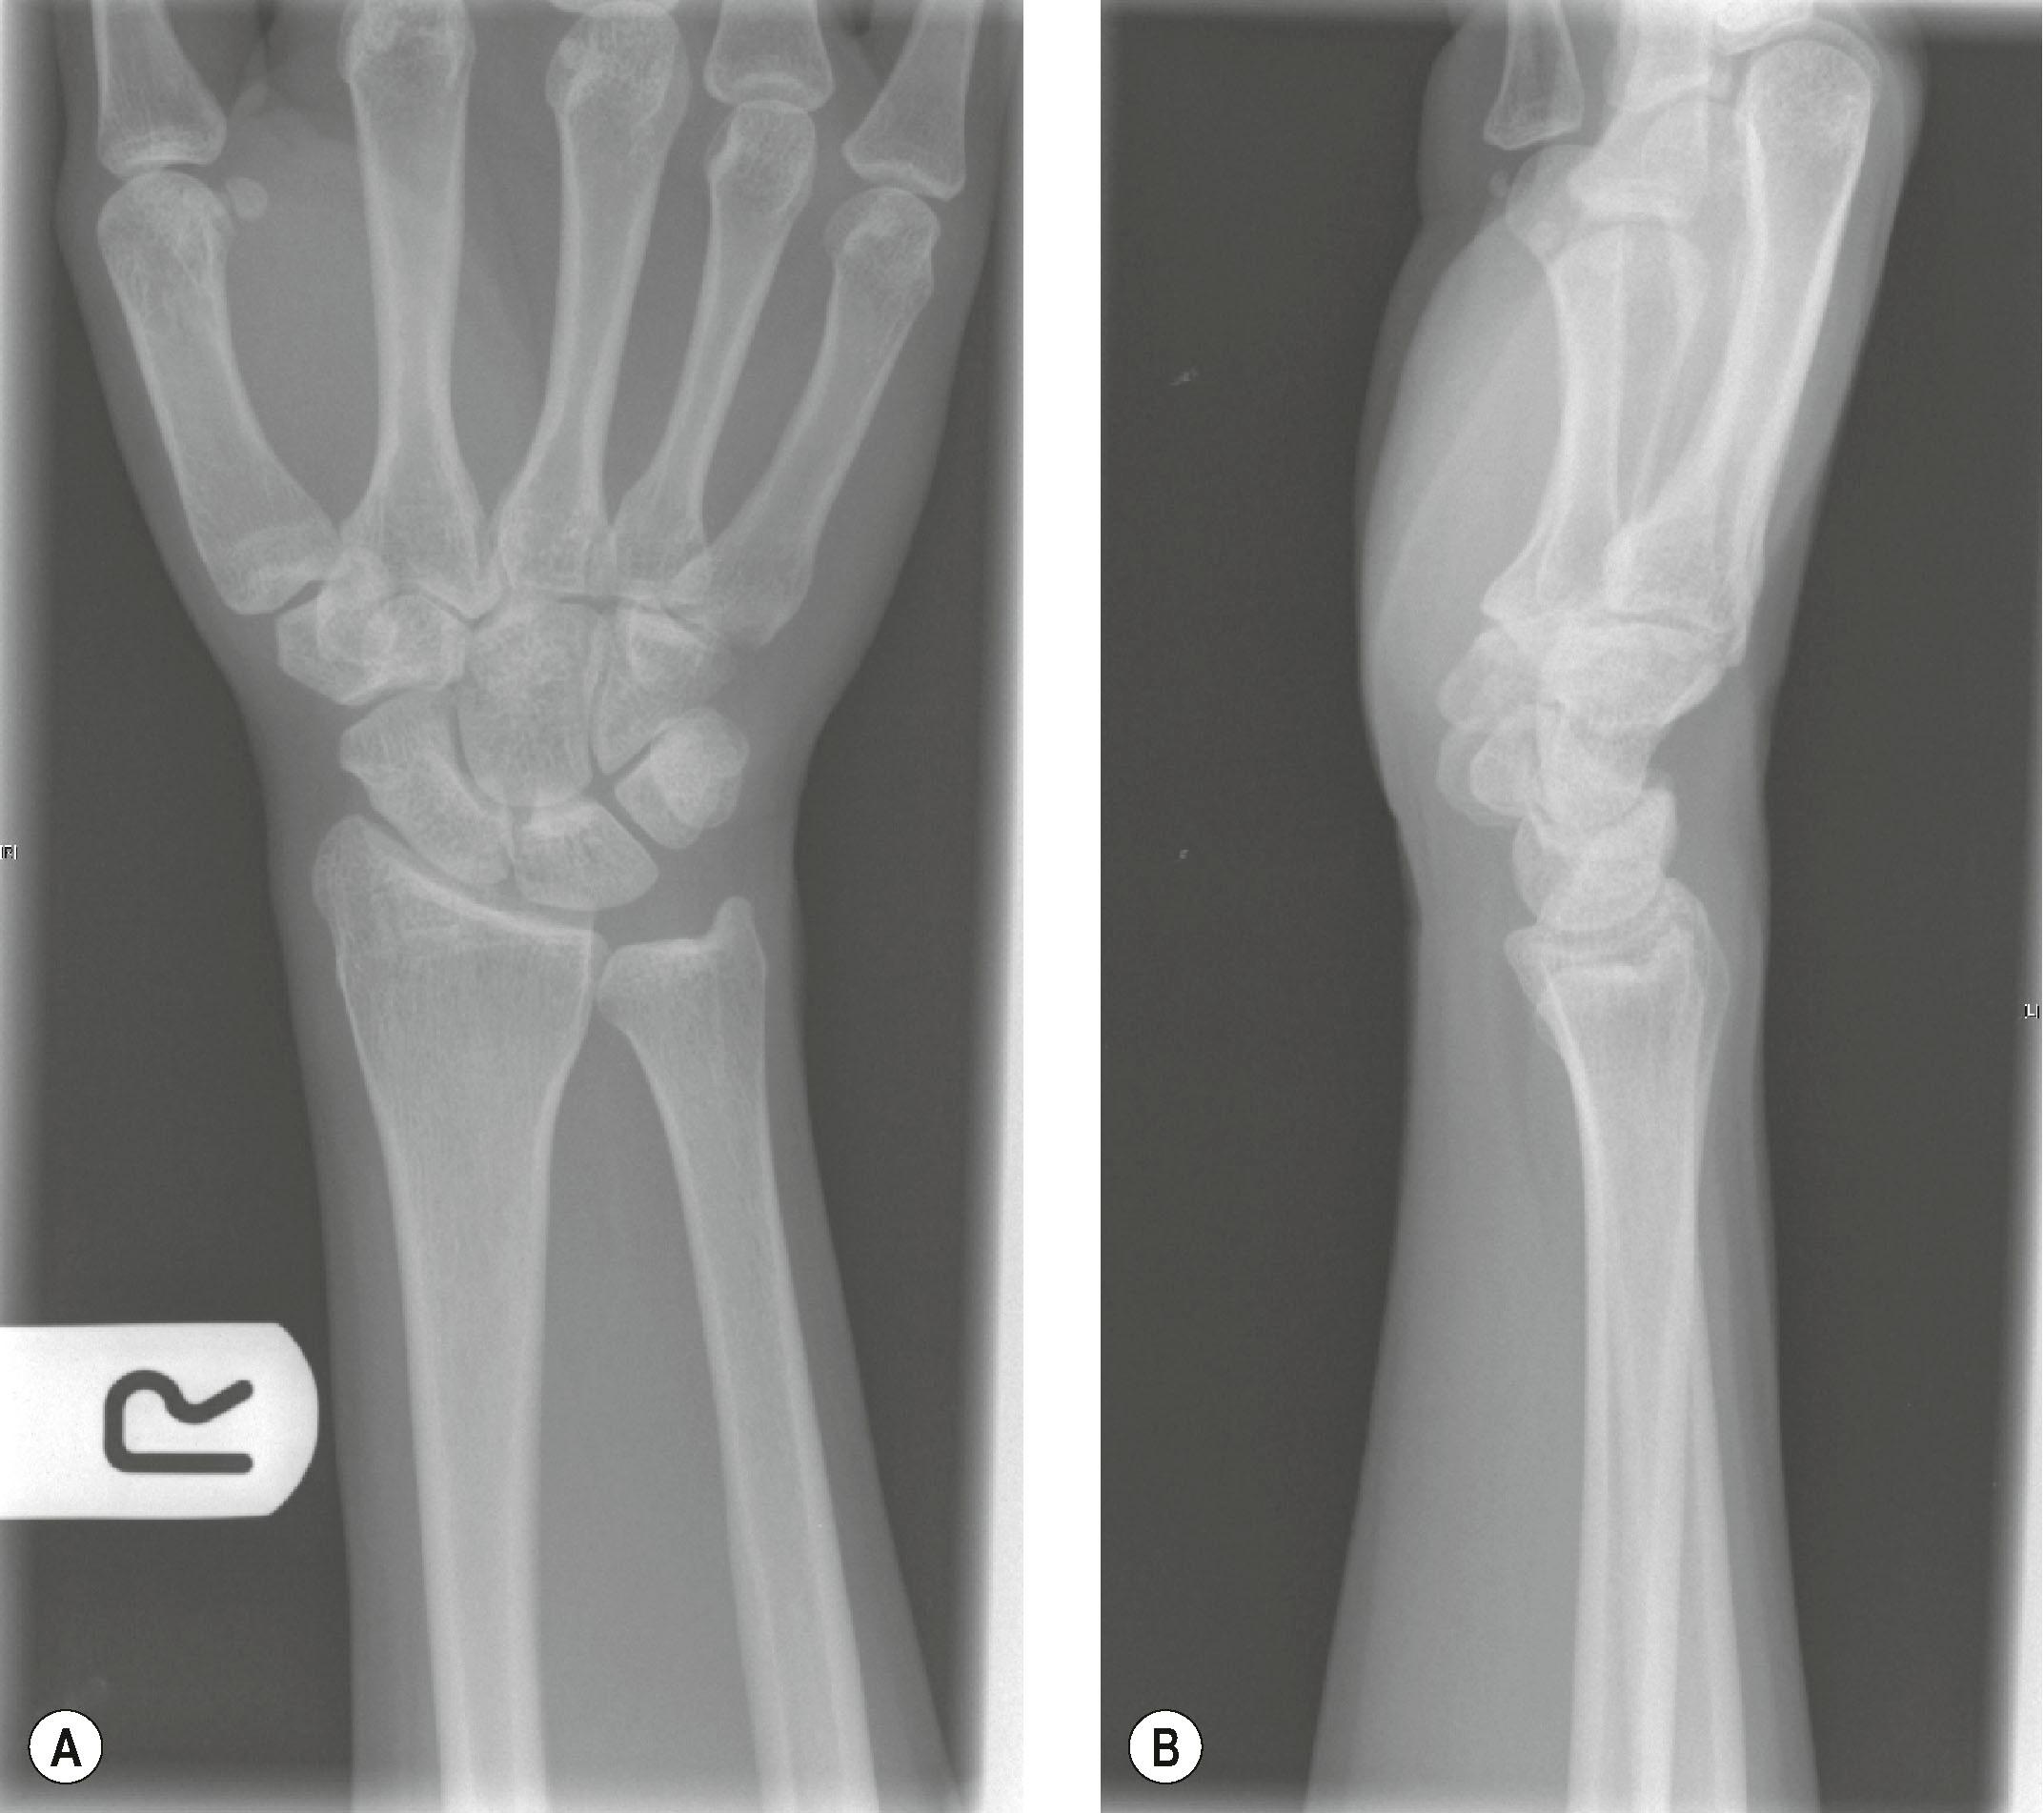 Figure 3.13, Normal wrist radiograph. (A) In the posteroanterior view, note the lateral position of the ulnar styloid and position of the extensor carpi ulnaris groove. It lies radial to the straight line that passes tangential to the radial edge of the ulnar styloid at the fovea. This indicates a good posteroanterior view. (B) On the lateral view, there is good radioulnar overlap.